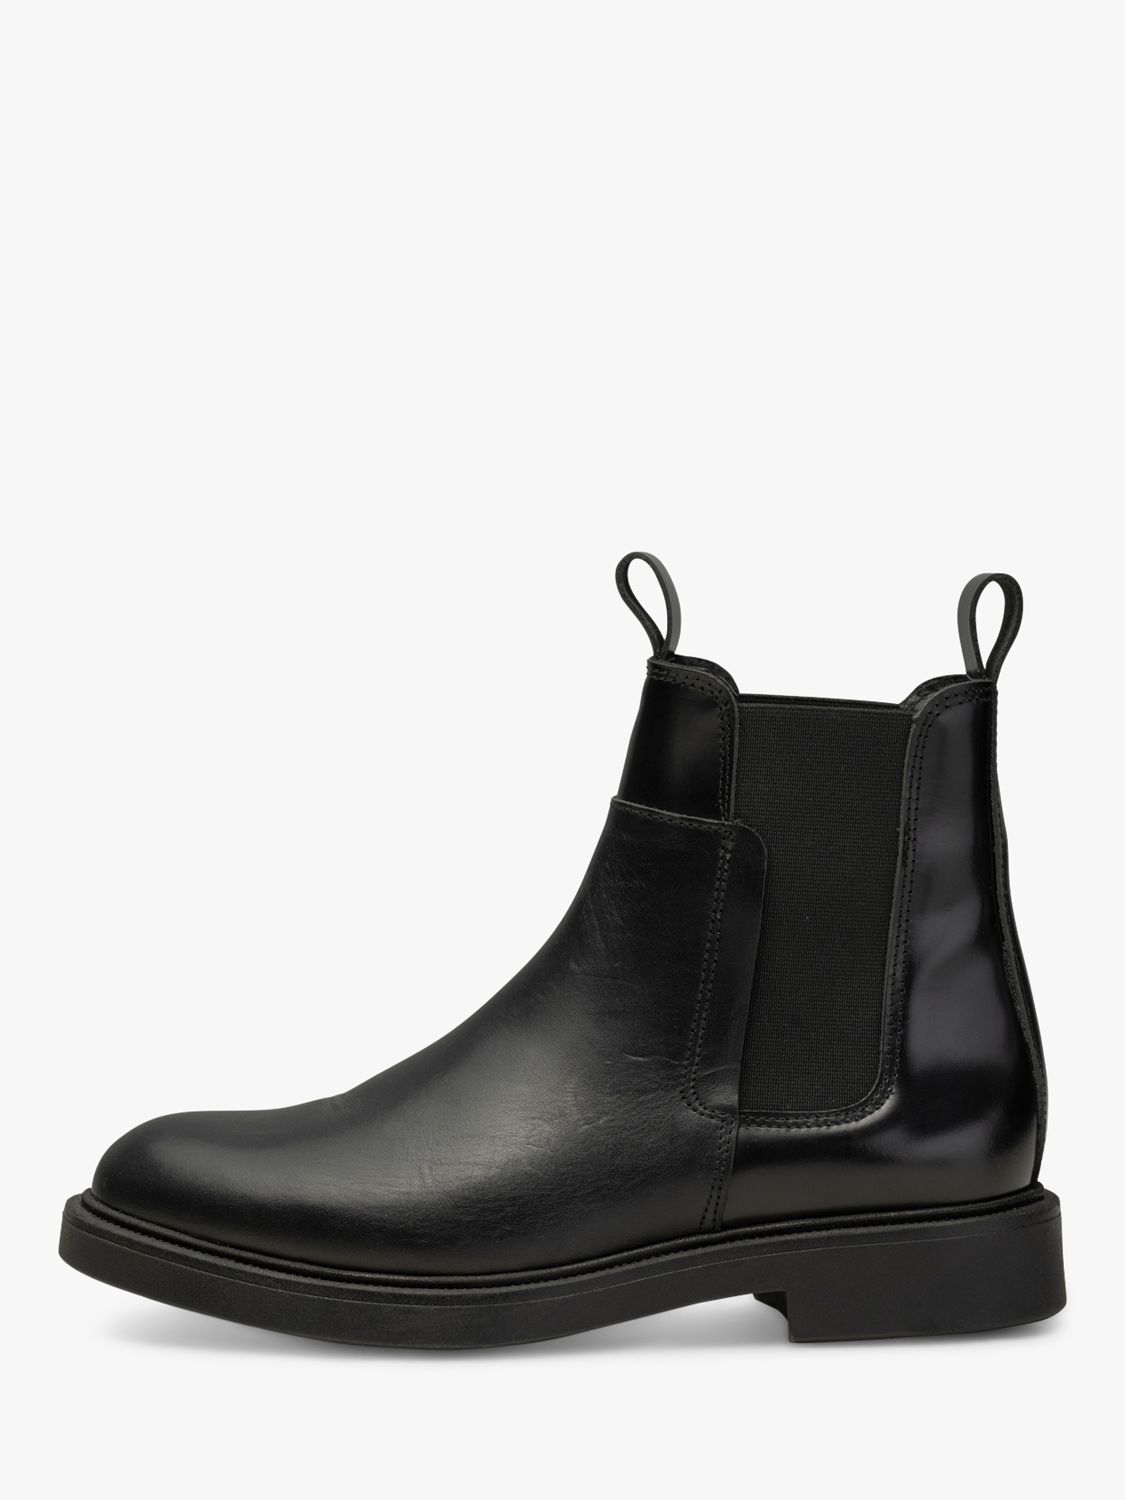 SHOE THE BEAR Thyra Leather Chelsea Boots, Black